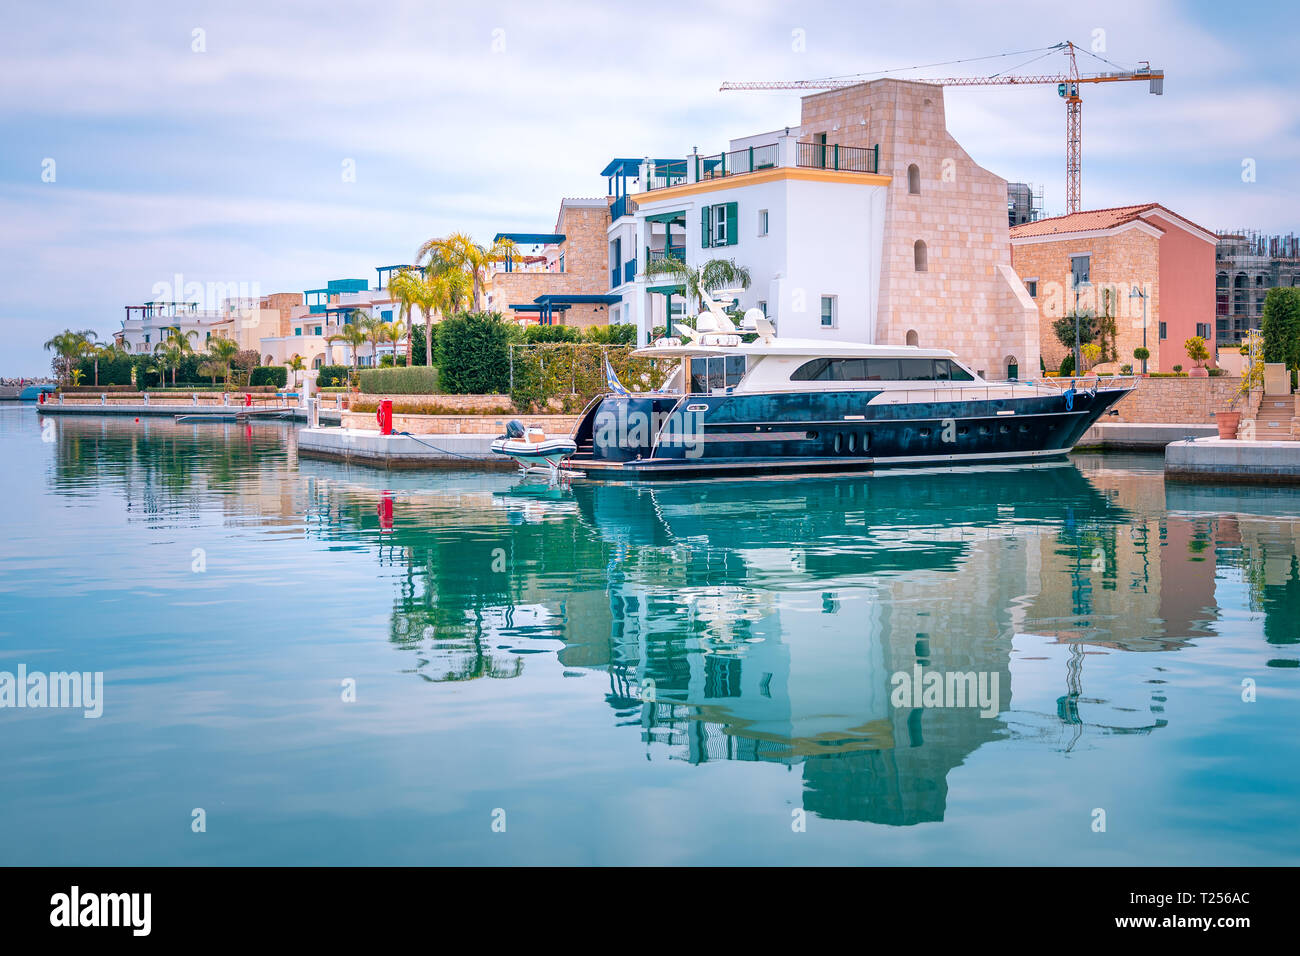 Beautiful view of Marina, Limassol city Cyprus. Modern, luxury life in newly developed port with yachts, restaurants, shops and waterfront promenade. Stock Photo